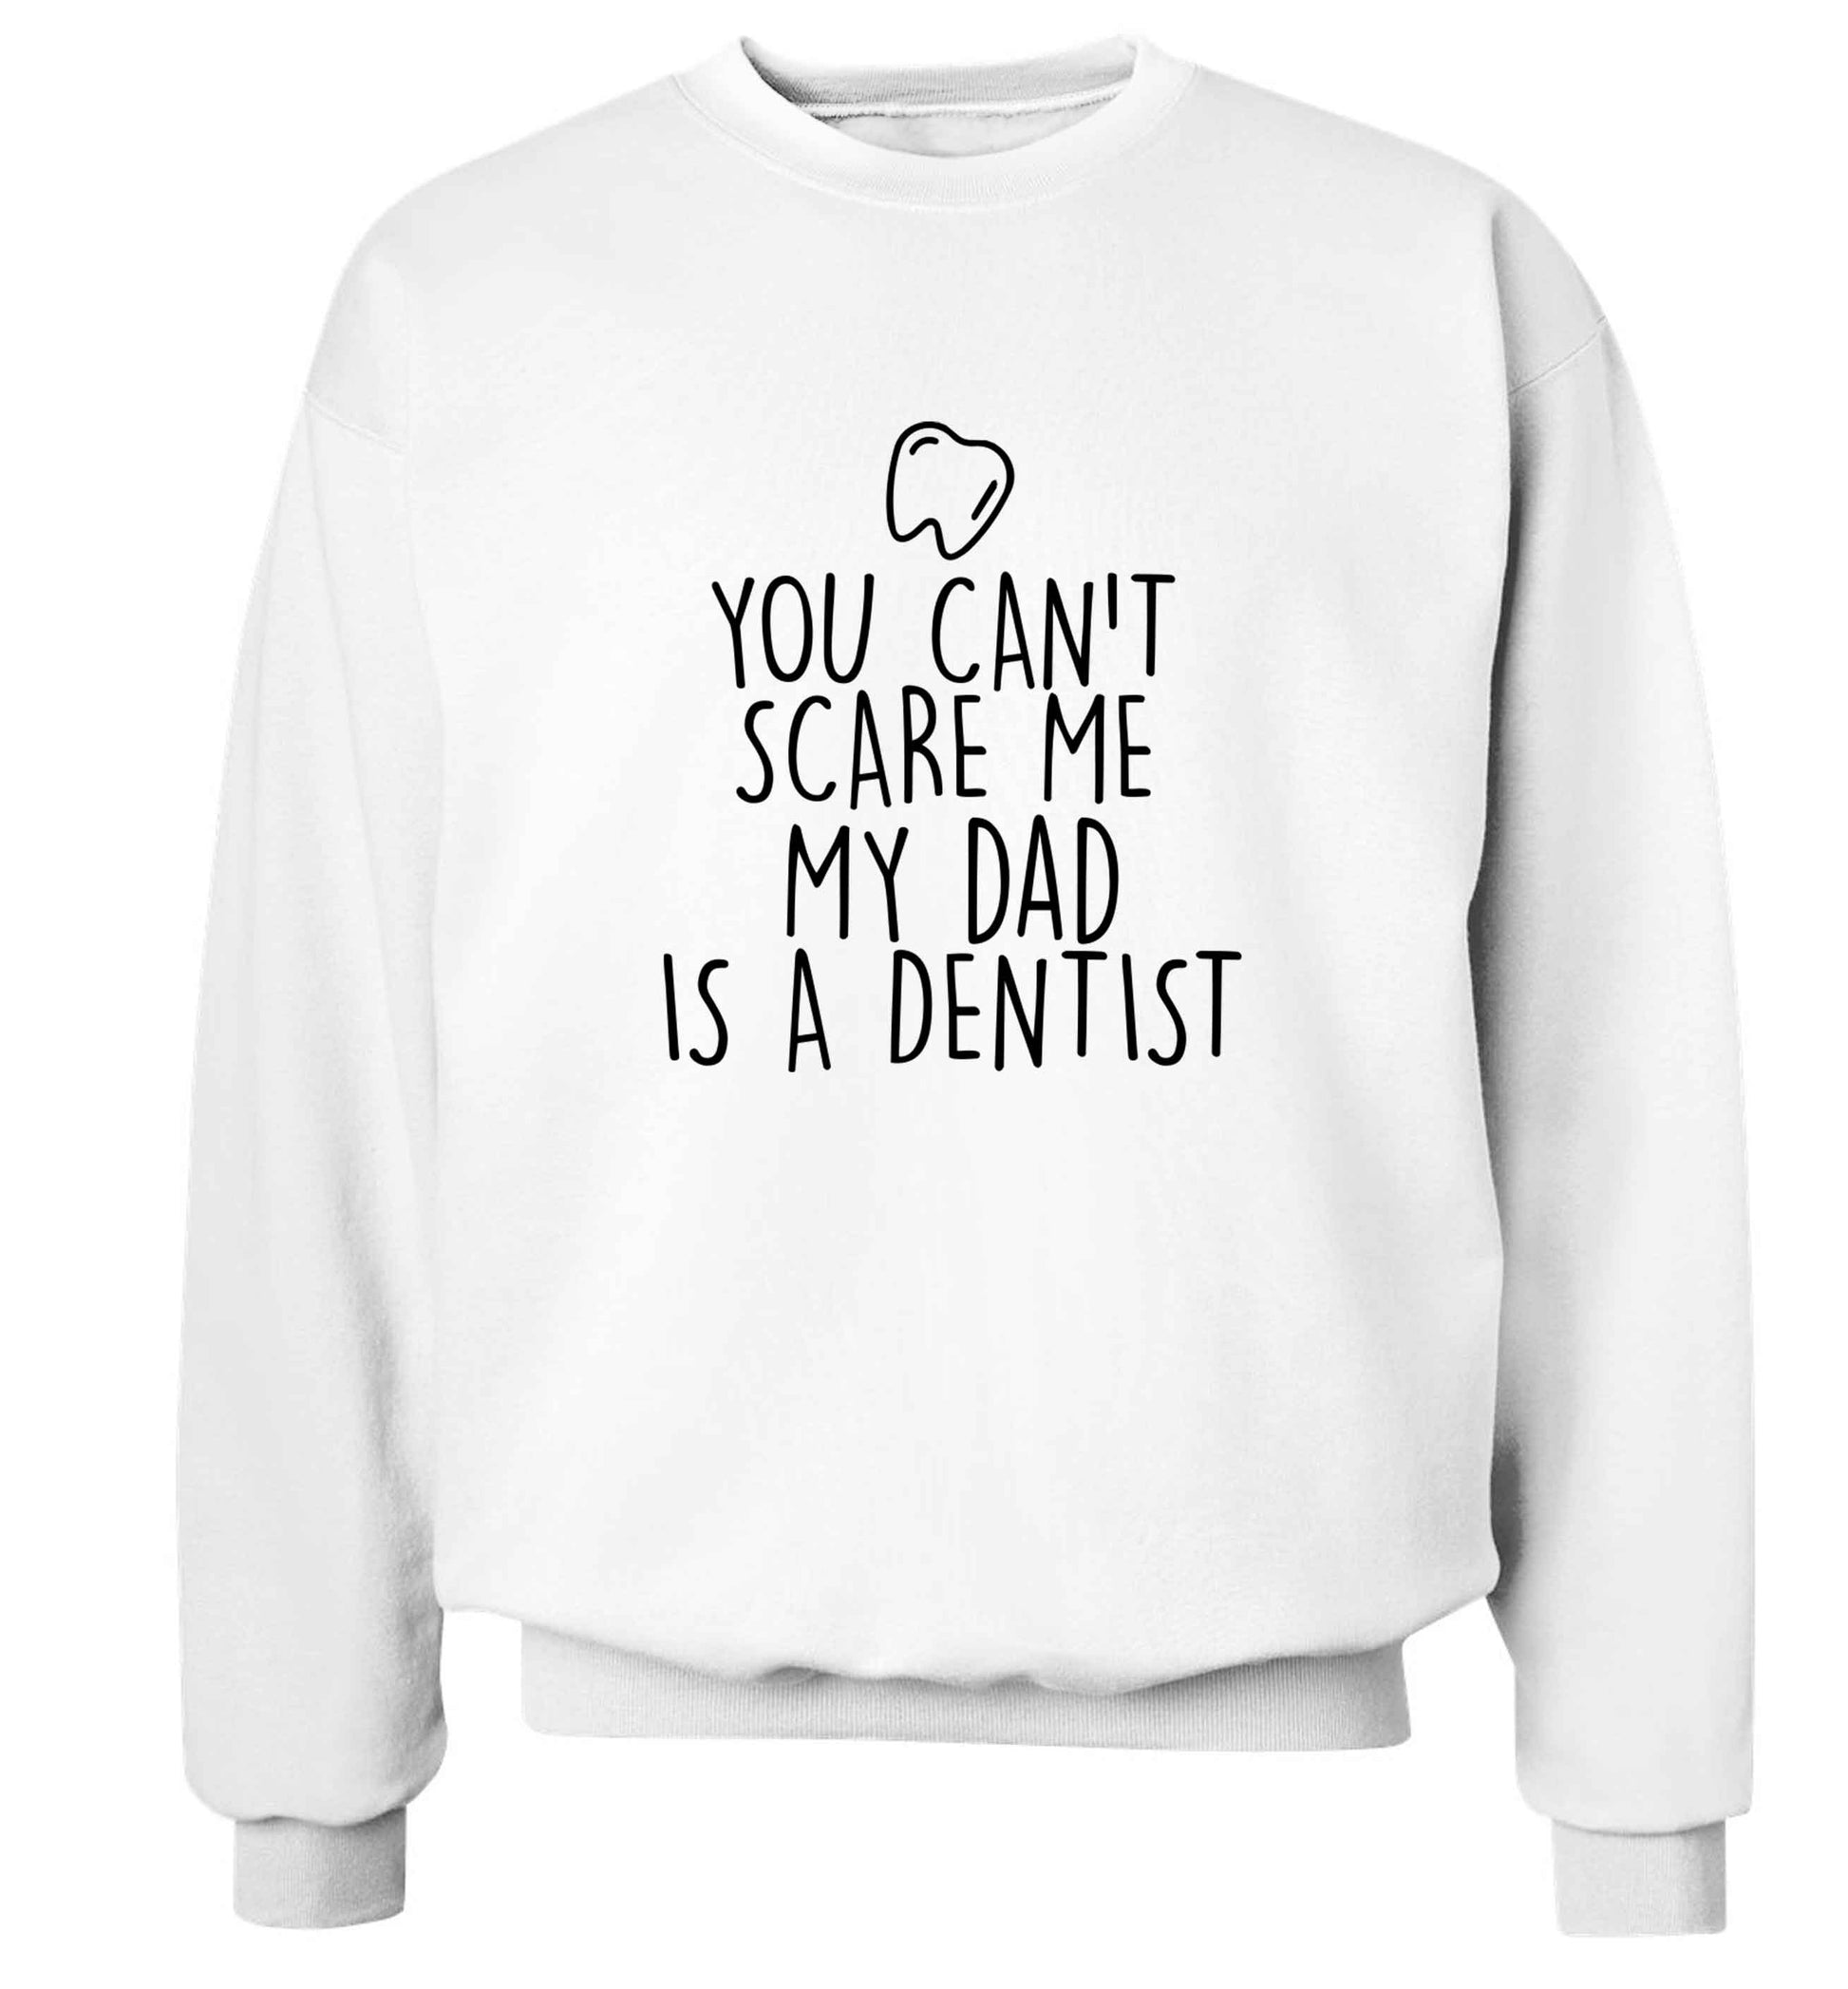 You can't scare me my dad is a dentist adult's unisex white sweater 2XL